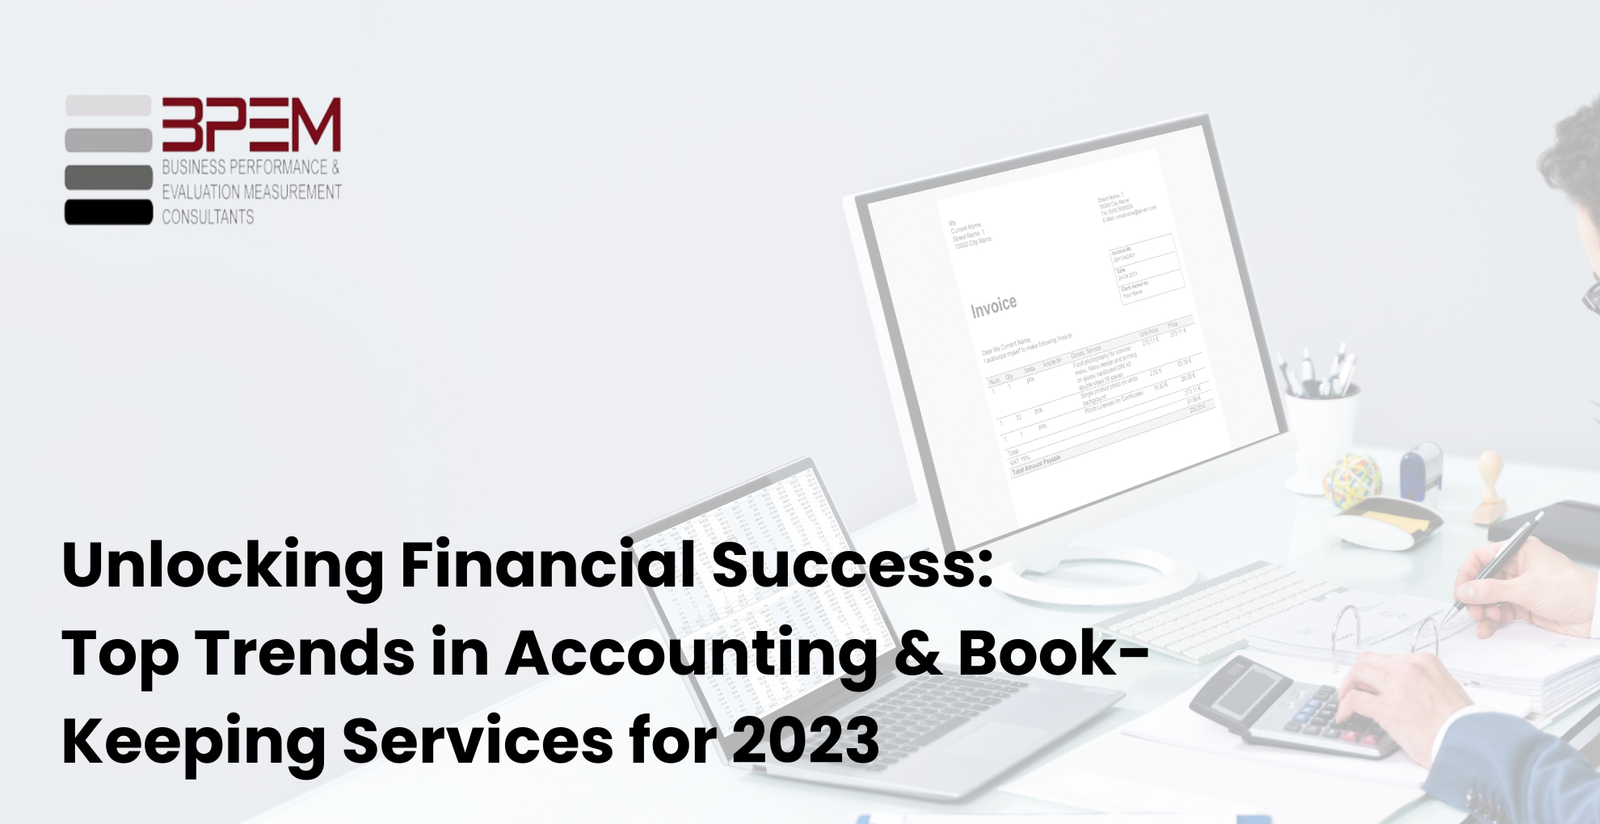 Accounting & Book-Keeping Services